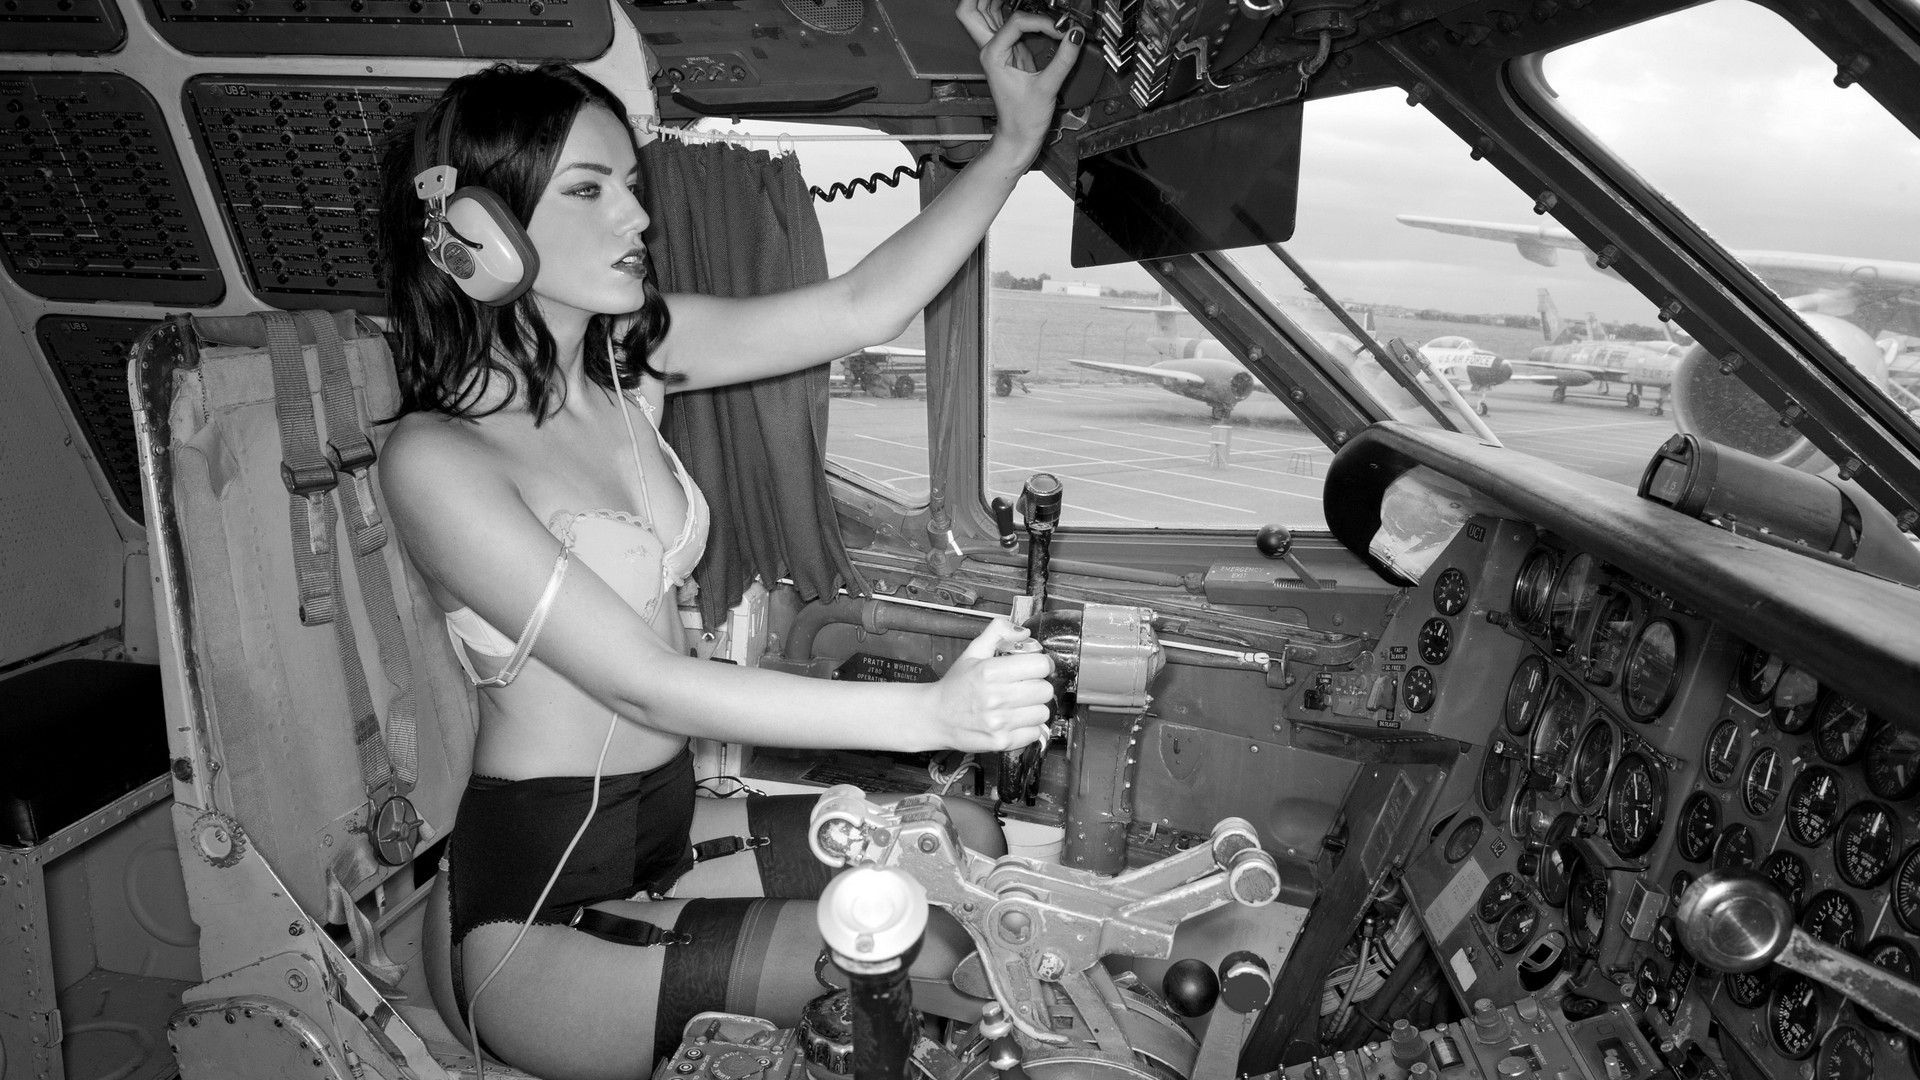 1920x1080 women monochrome model legs vehicle photography airplane aircraft lingerie  Person pinup models cockpit aviation black and